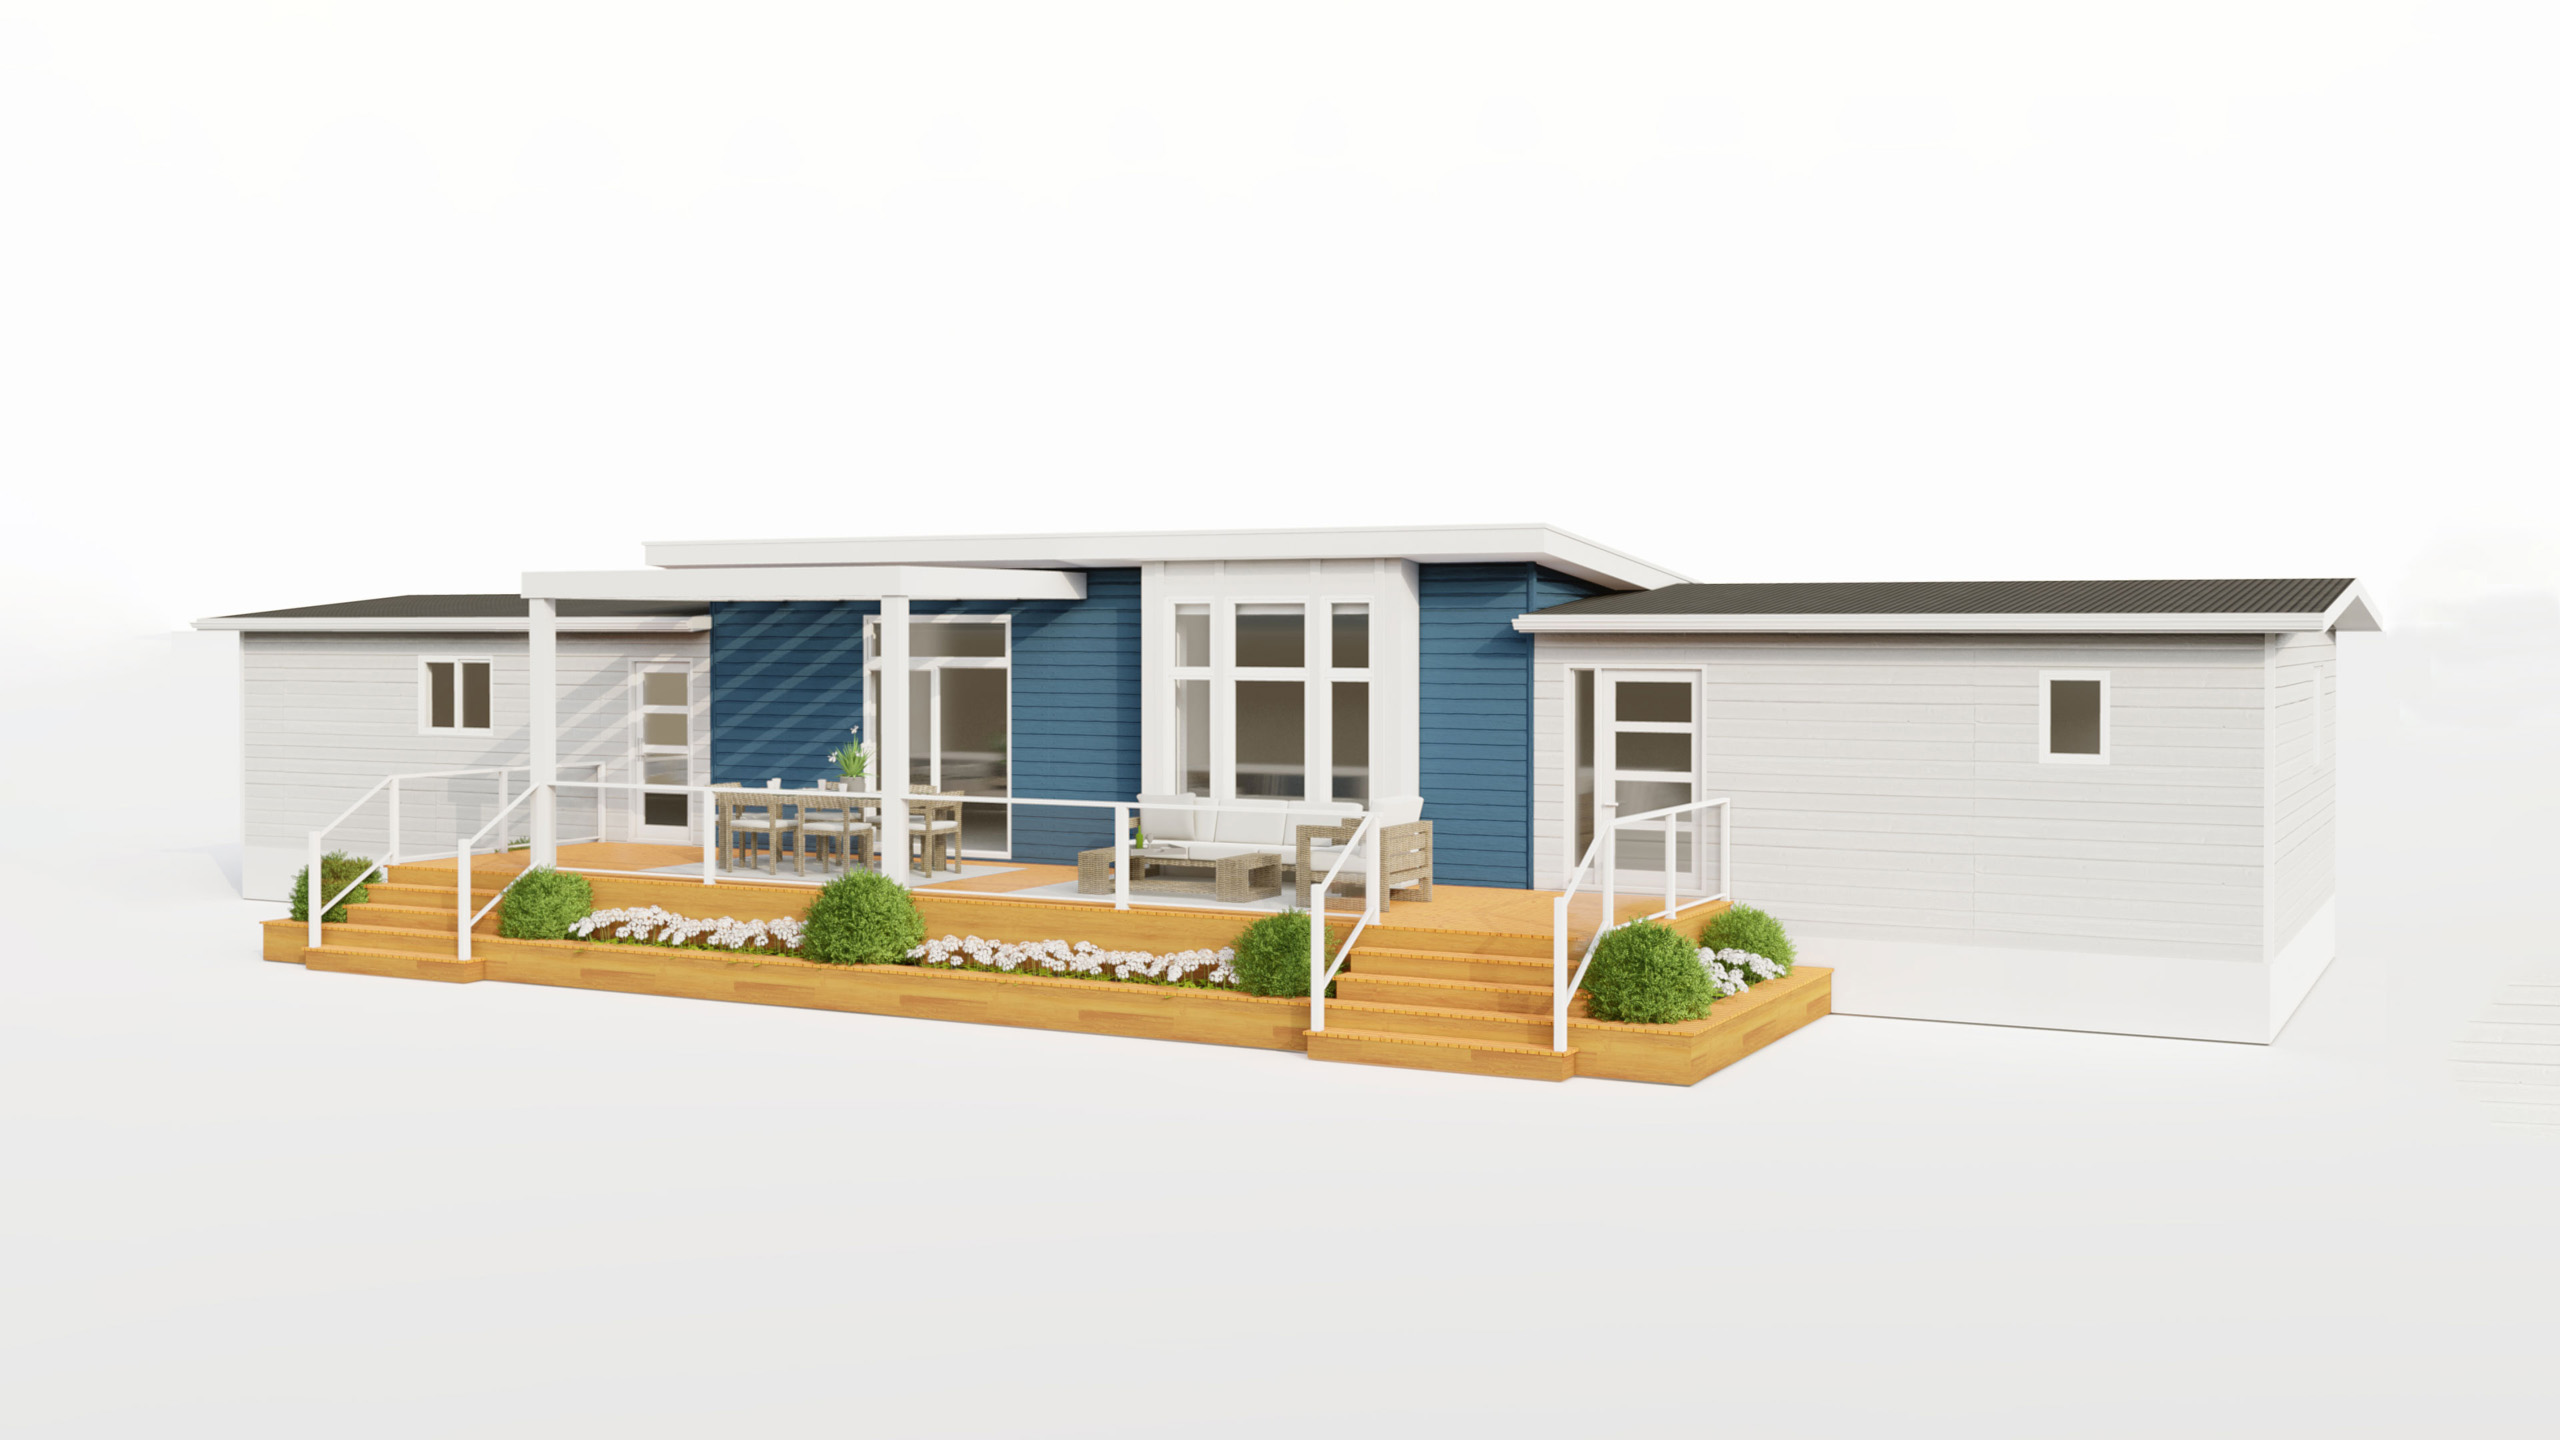 Rendering of Lennox with Seaside styling